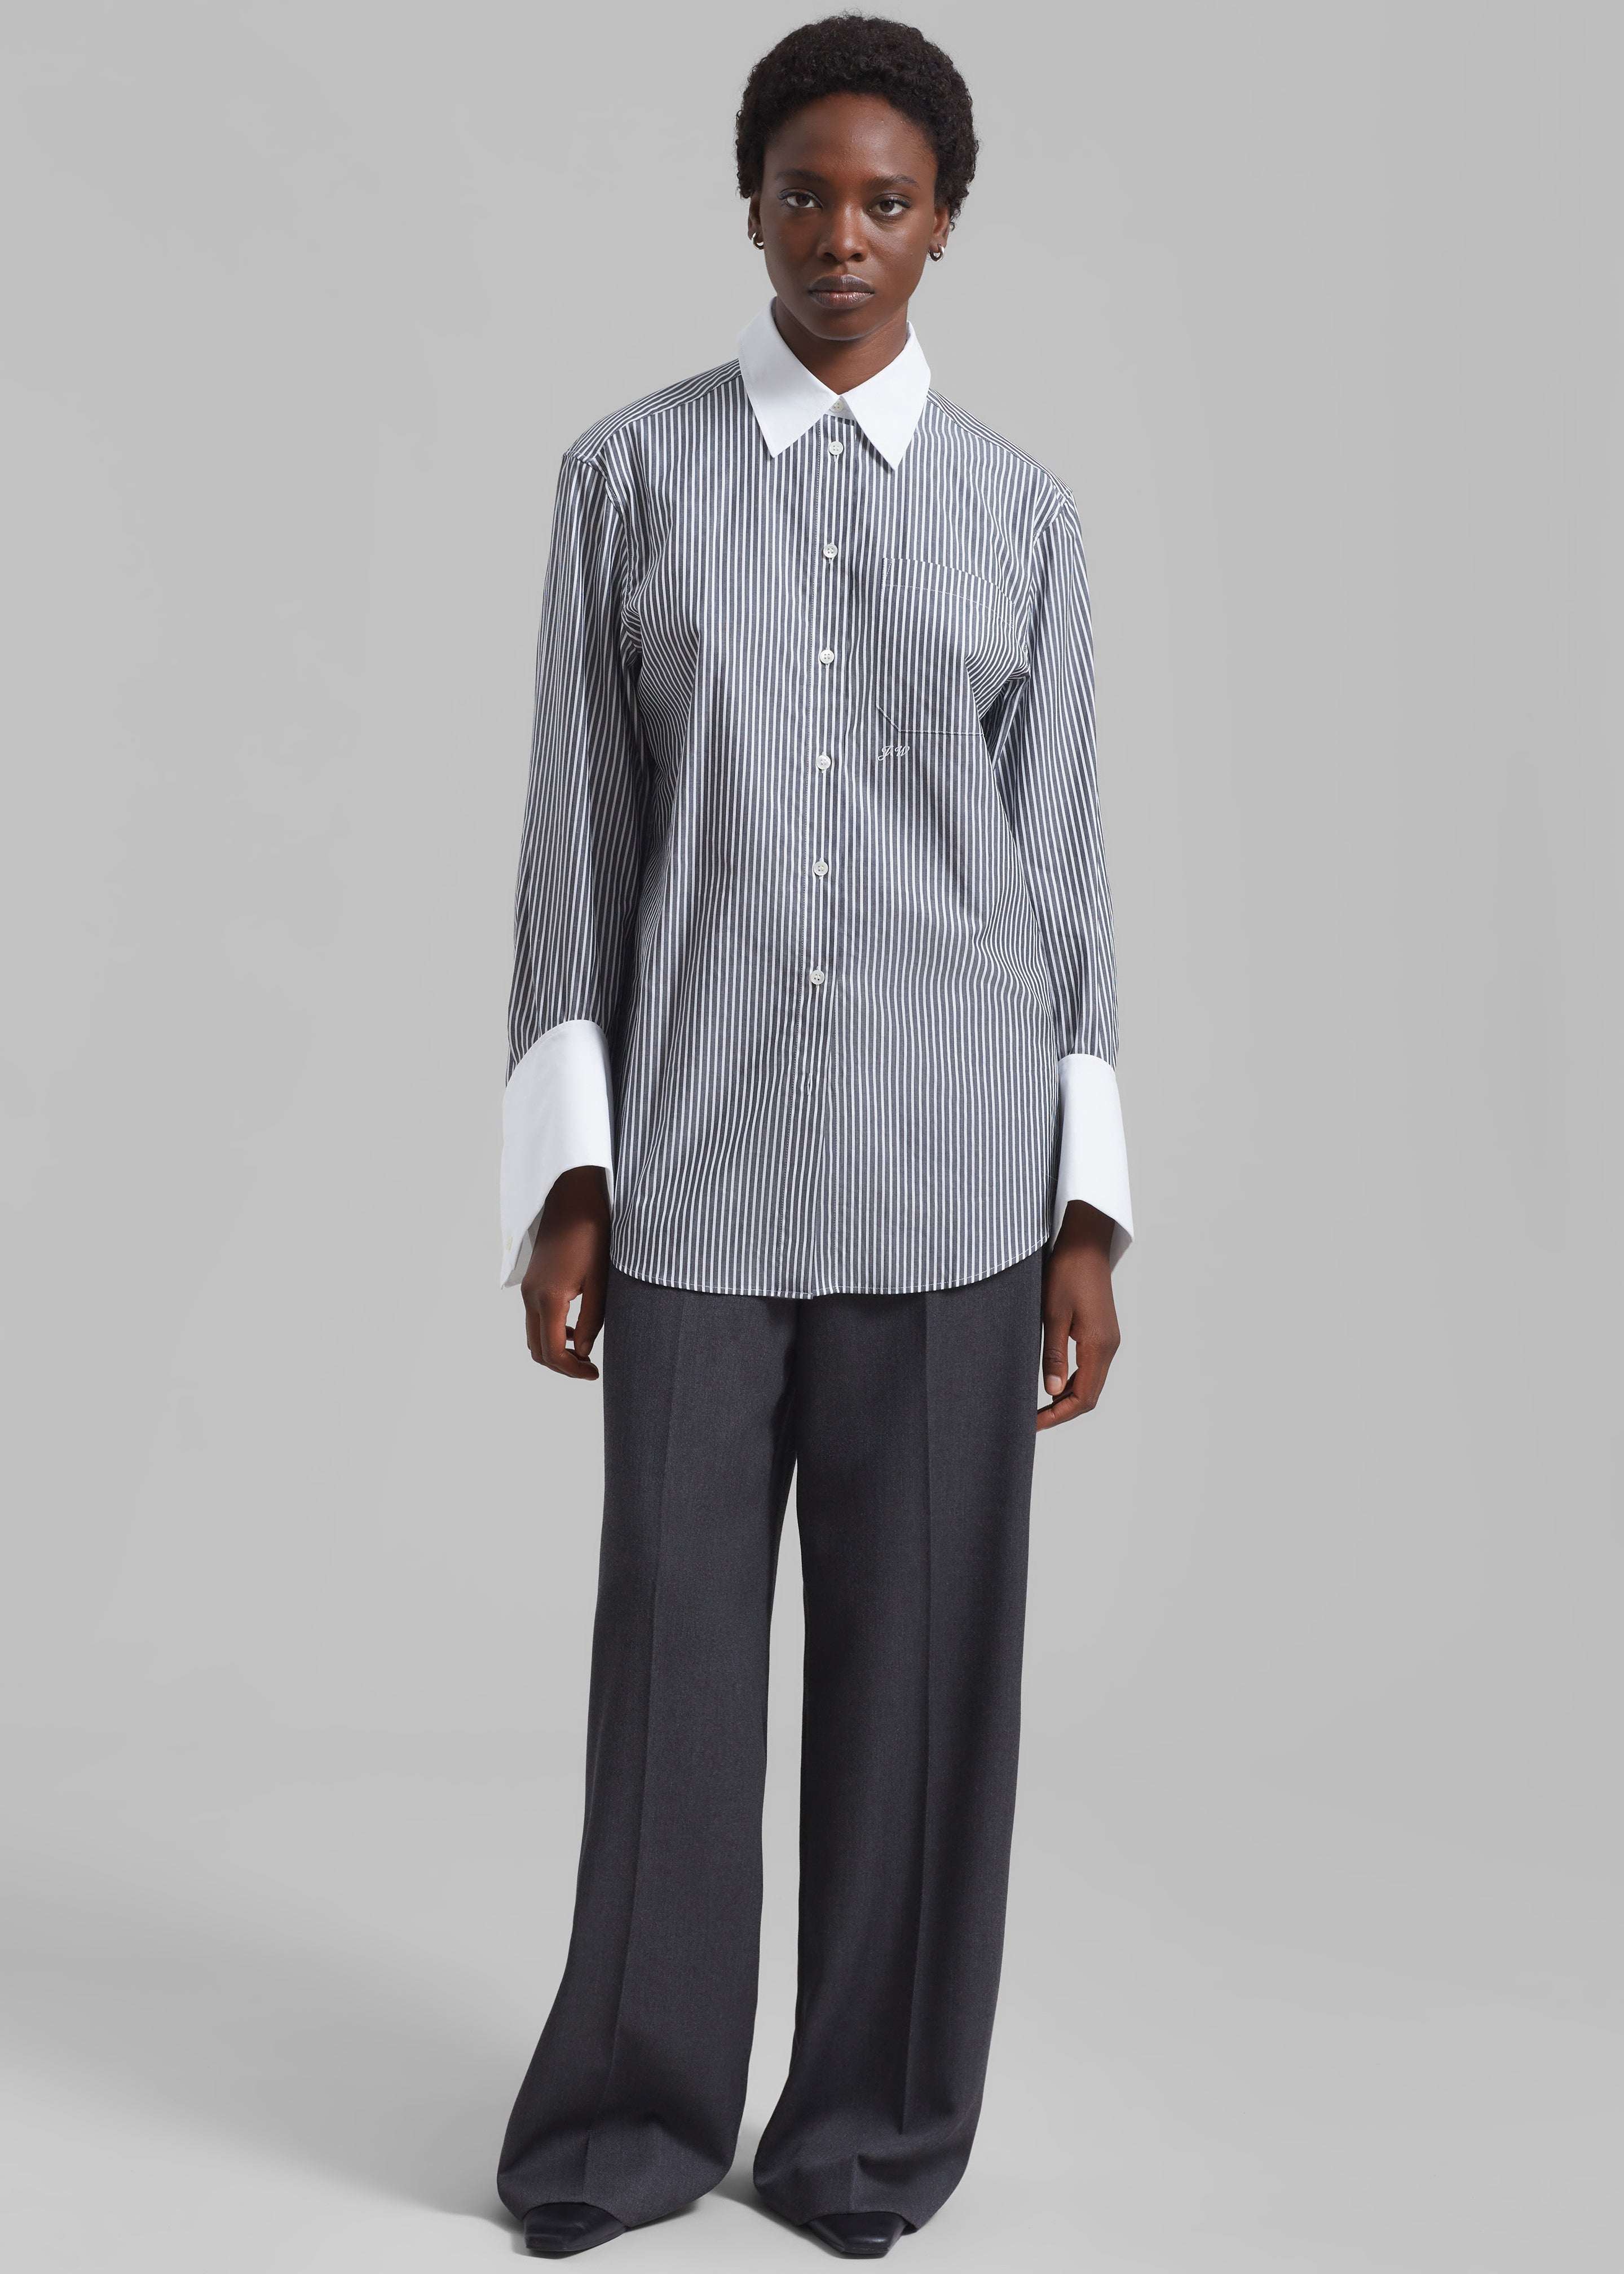 JW Anderson Oversized Cuff Shirt - Charcoal/White - 1